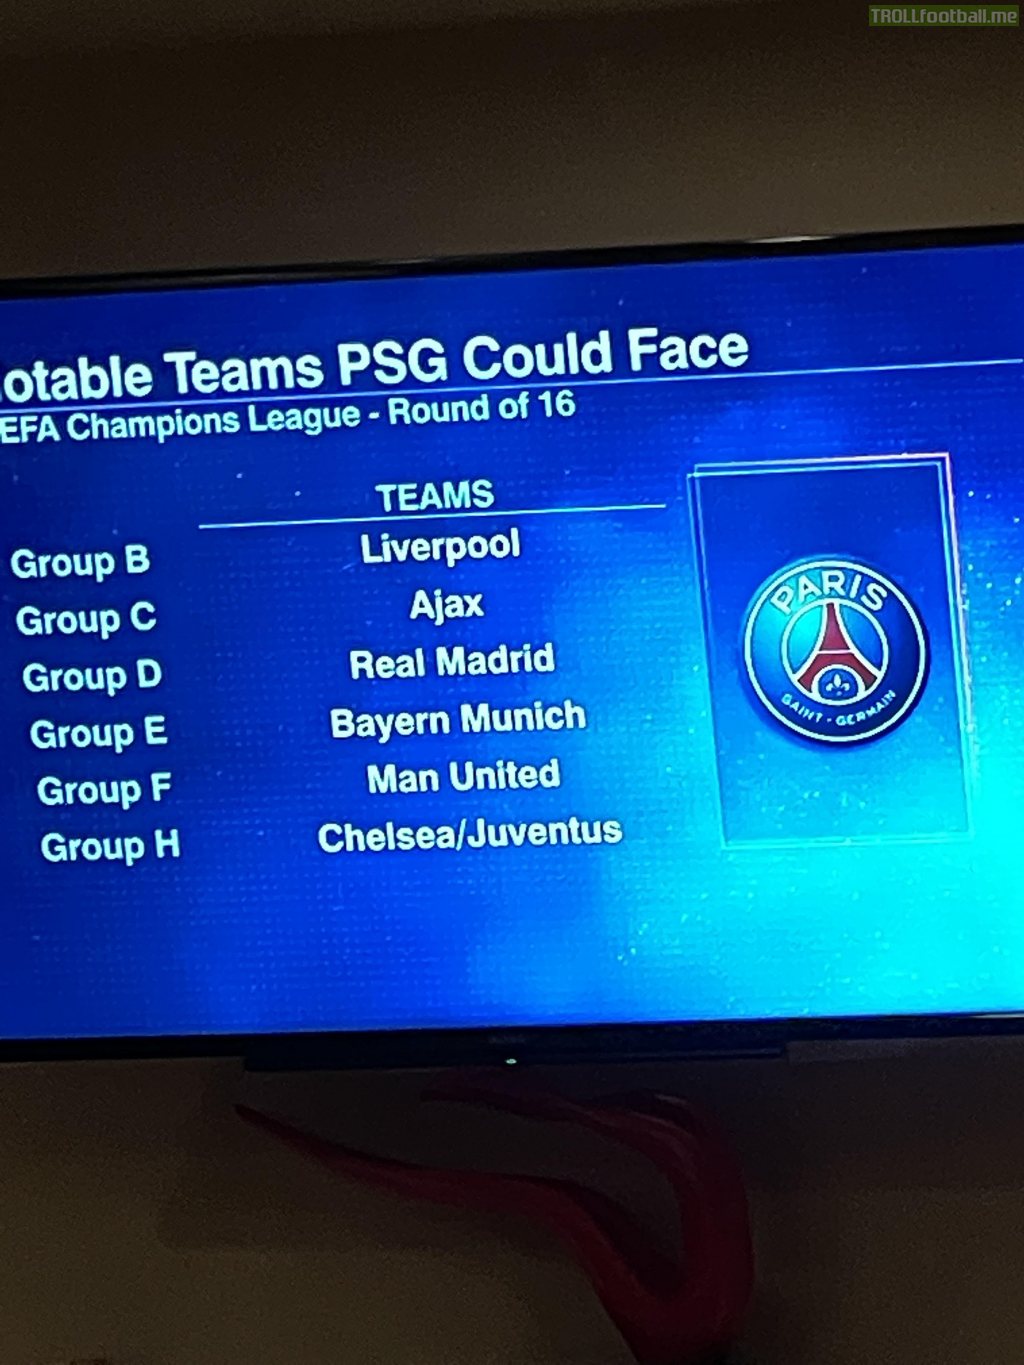 Possible teams for PSG to vs in the round of 16!!😳😳